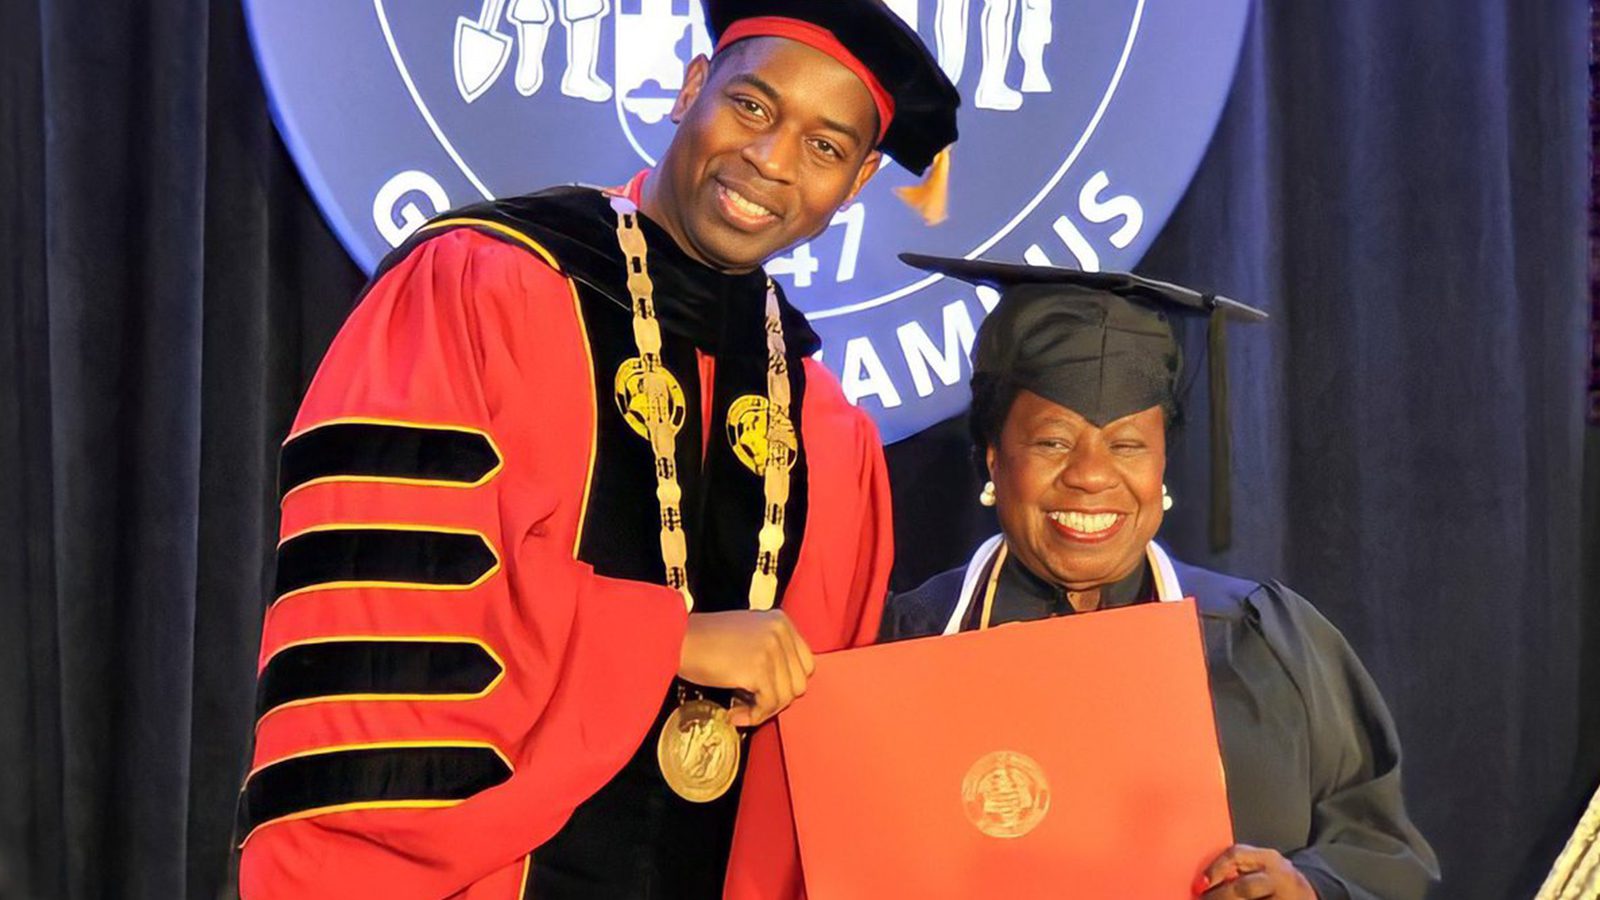 Determined 82-Year-Old Graduates College, a Day After Her Birthday